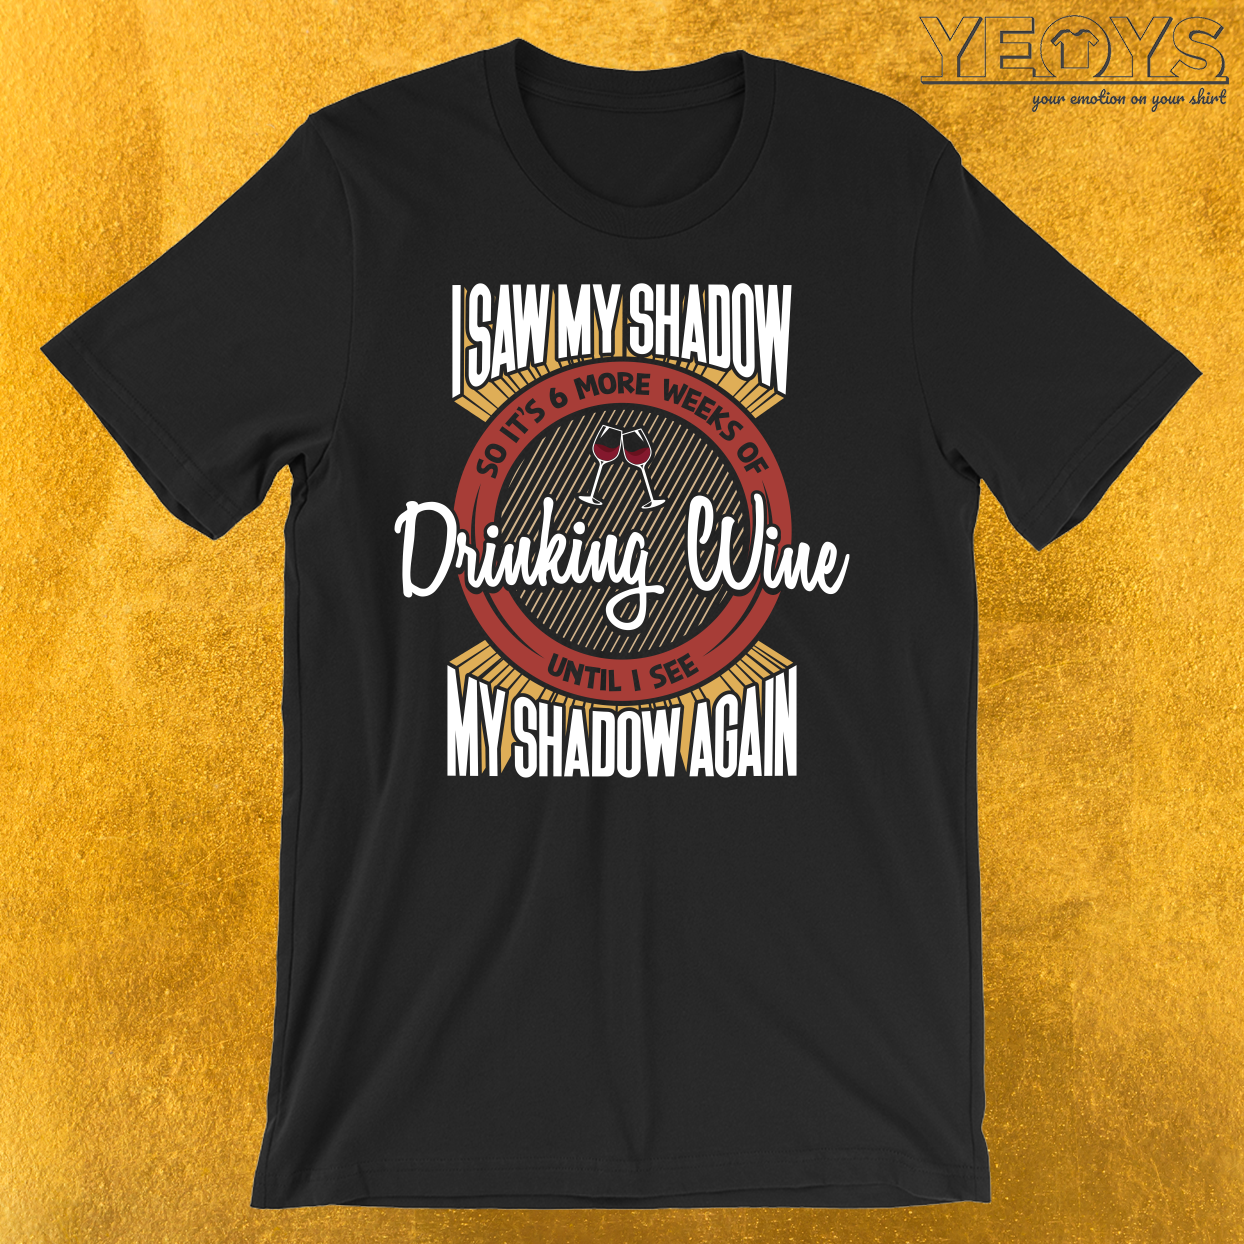 6 More Weeks Of Drinking Wine T-Shirt